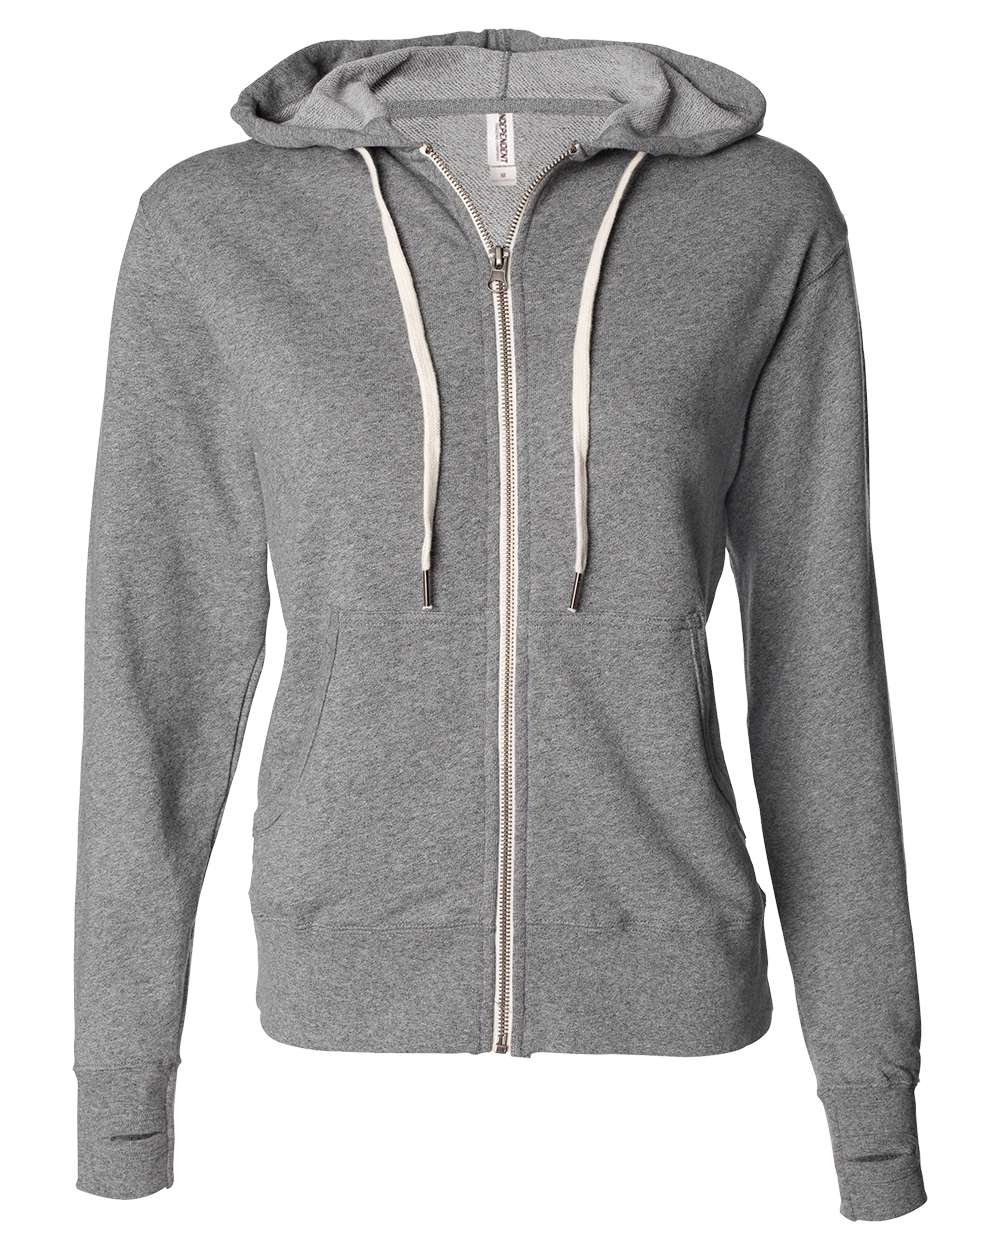 Independent Trading Co. - Heathered French Terry Full-Zip Hooded Sweatshirt - PRM90HTZ